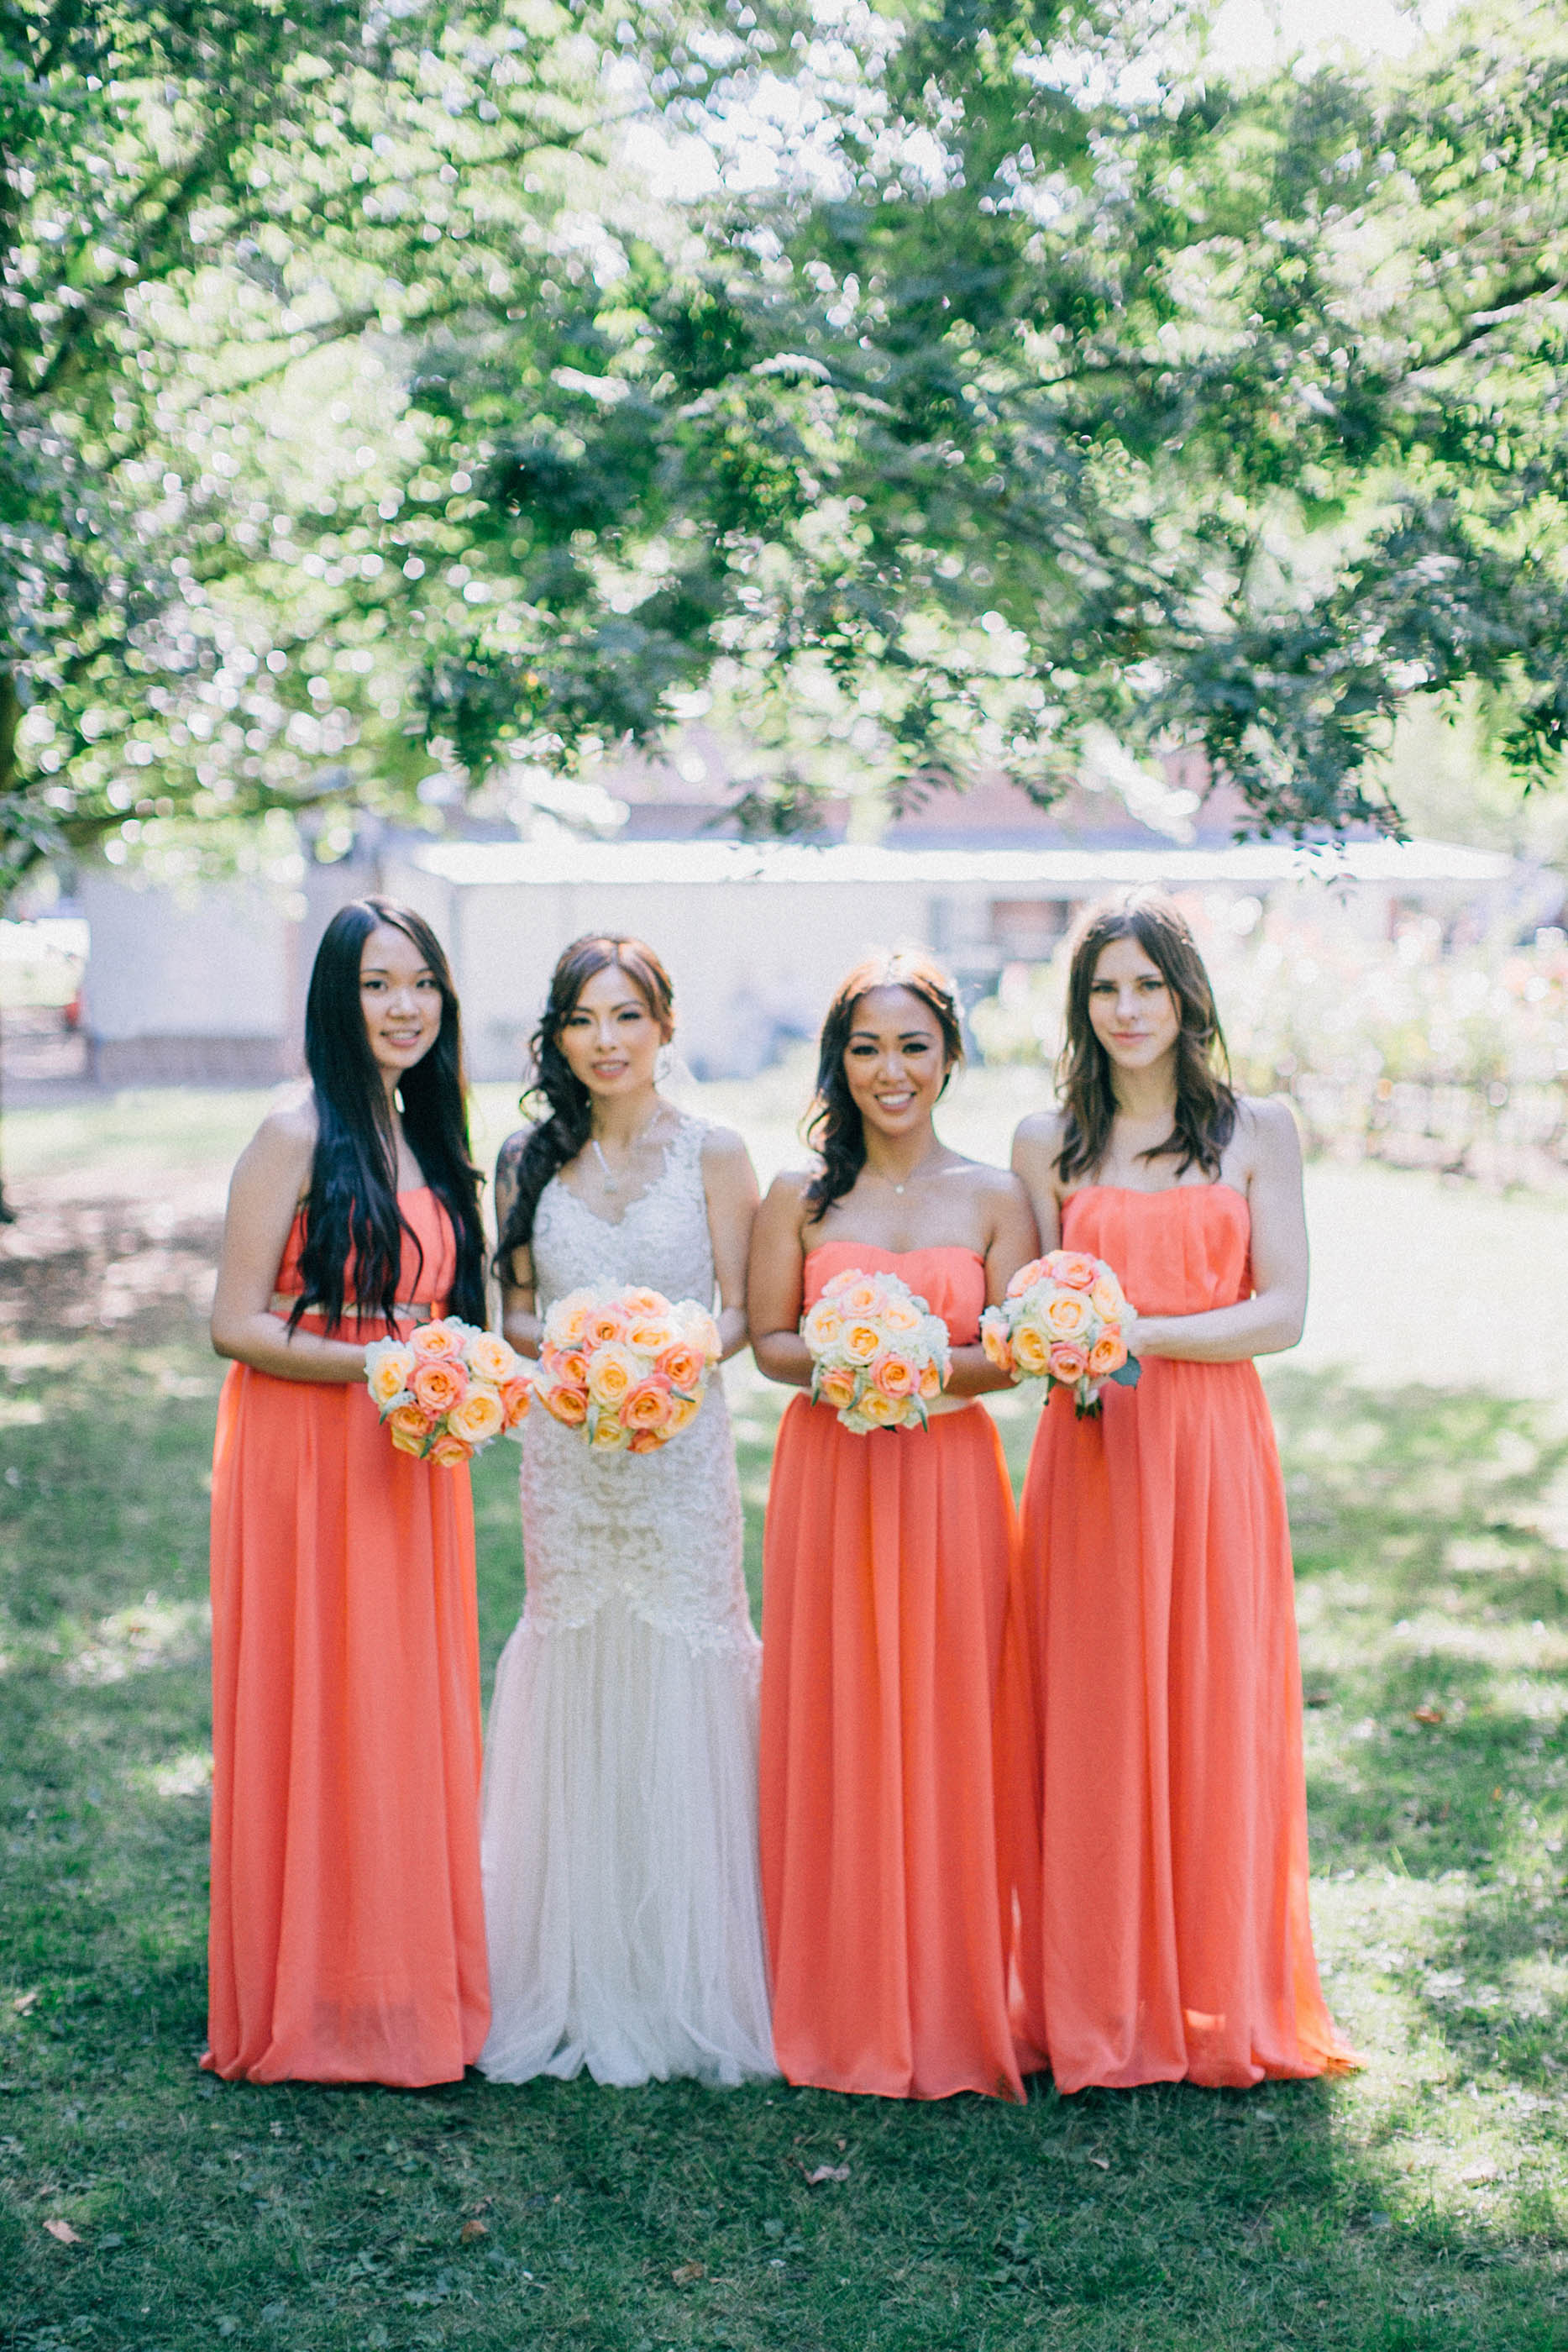 nicholas-lau-photo-photography-fine-art-film-wedding-london-asian-chinese-uk-mulitcultural-ceremony-reception-bride-with-hens-bridesmaids-coral-dresses